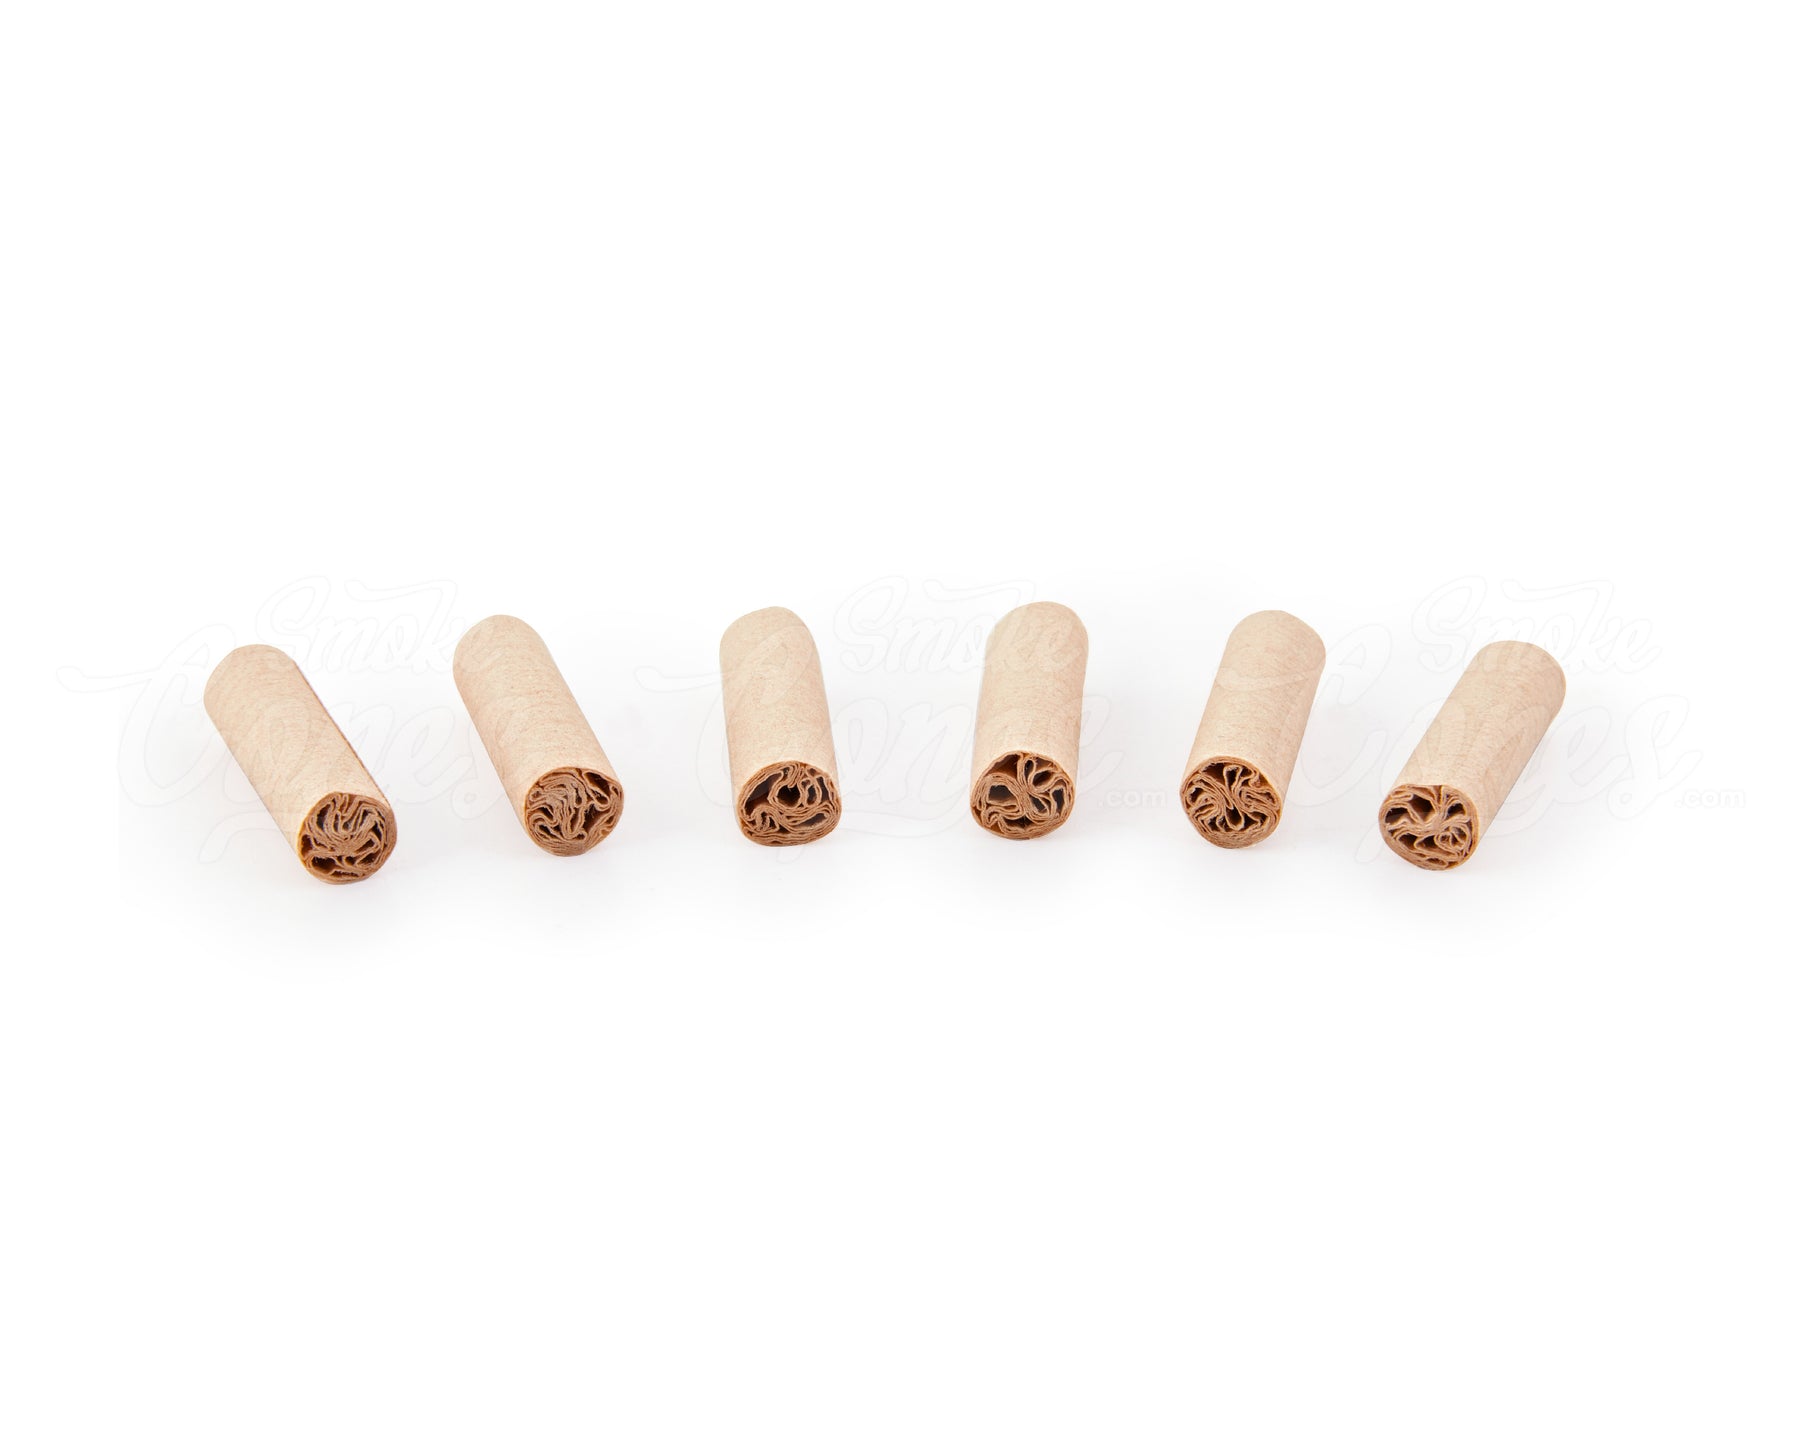 FLOWTIPS 20mm Unbleached Biodegradable Filter Tips 10/Box